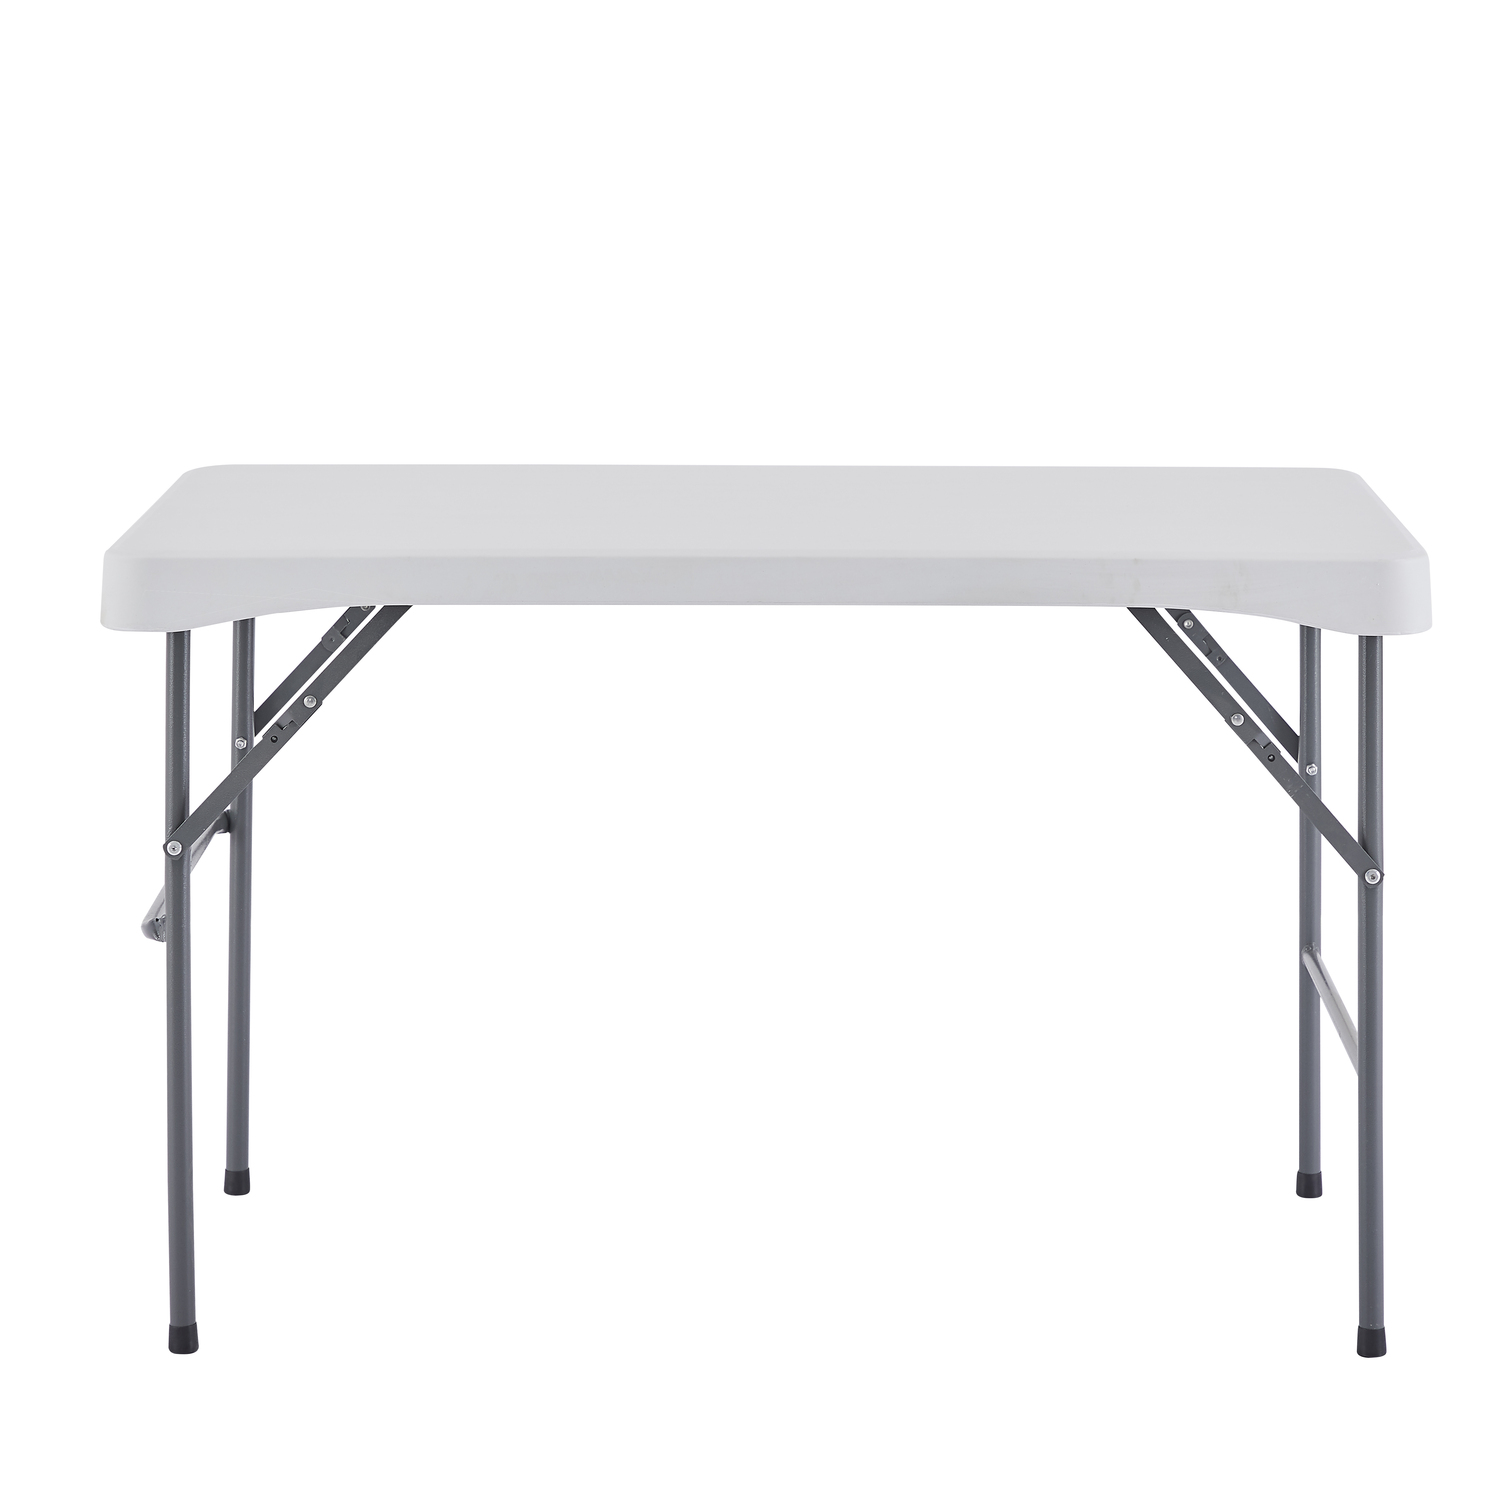 3 Piece Folding Table with Benches, 3.7 Feet Portable Picnic Table Set, Heat Resistant Waterproof Outdoor Dining Table Set, Folding Side Table Set, Table and Bench Set for Party White - image 3 of 7